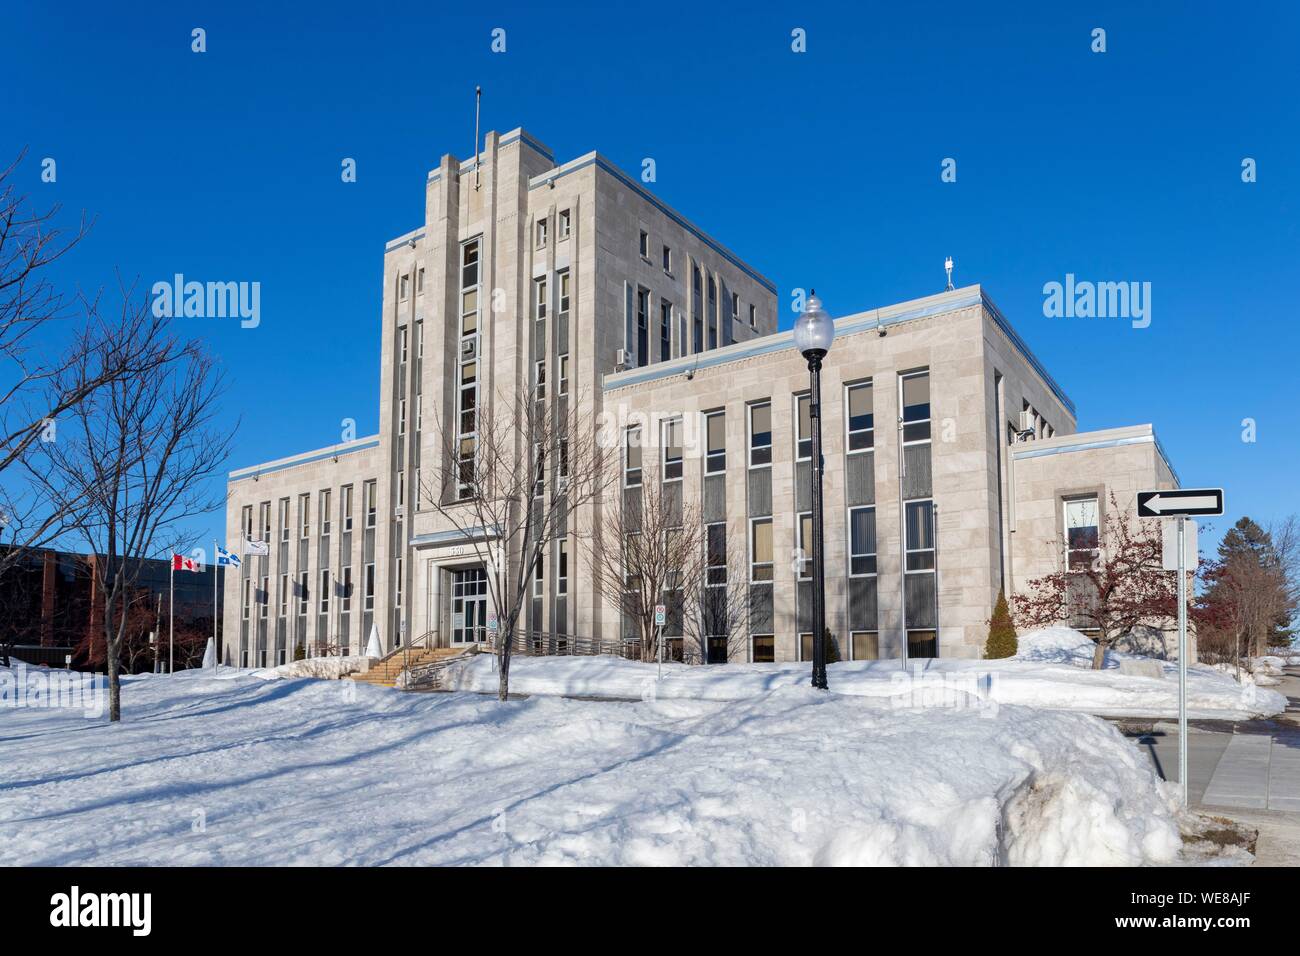 Canada, Quebec province, Mauricie region, Shawinigan and surrounding area, City Hall Stock Photo